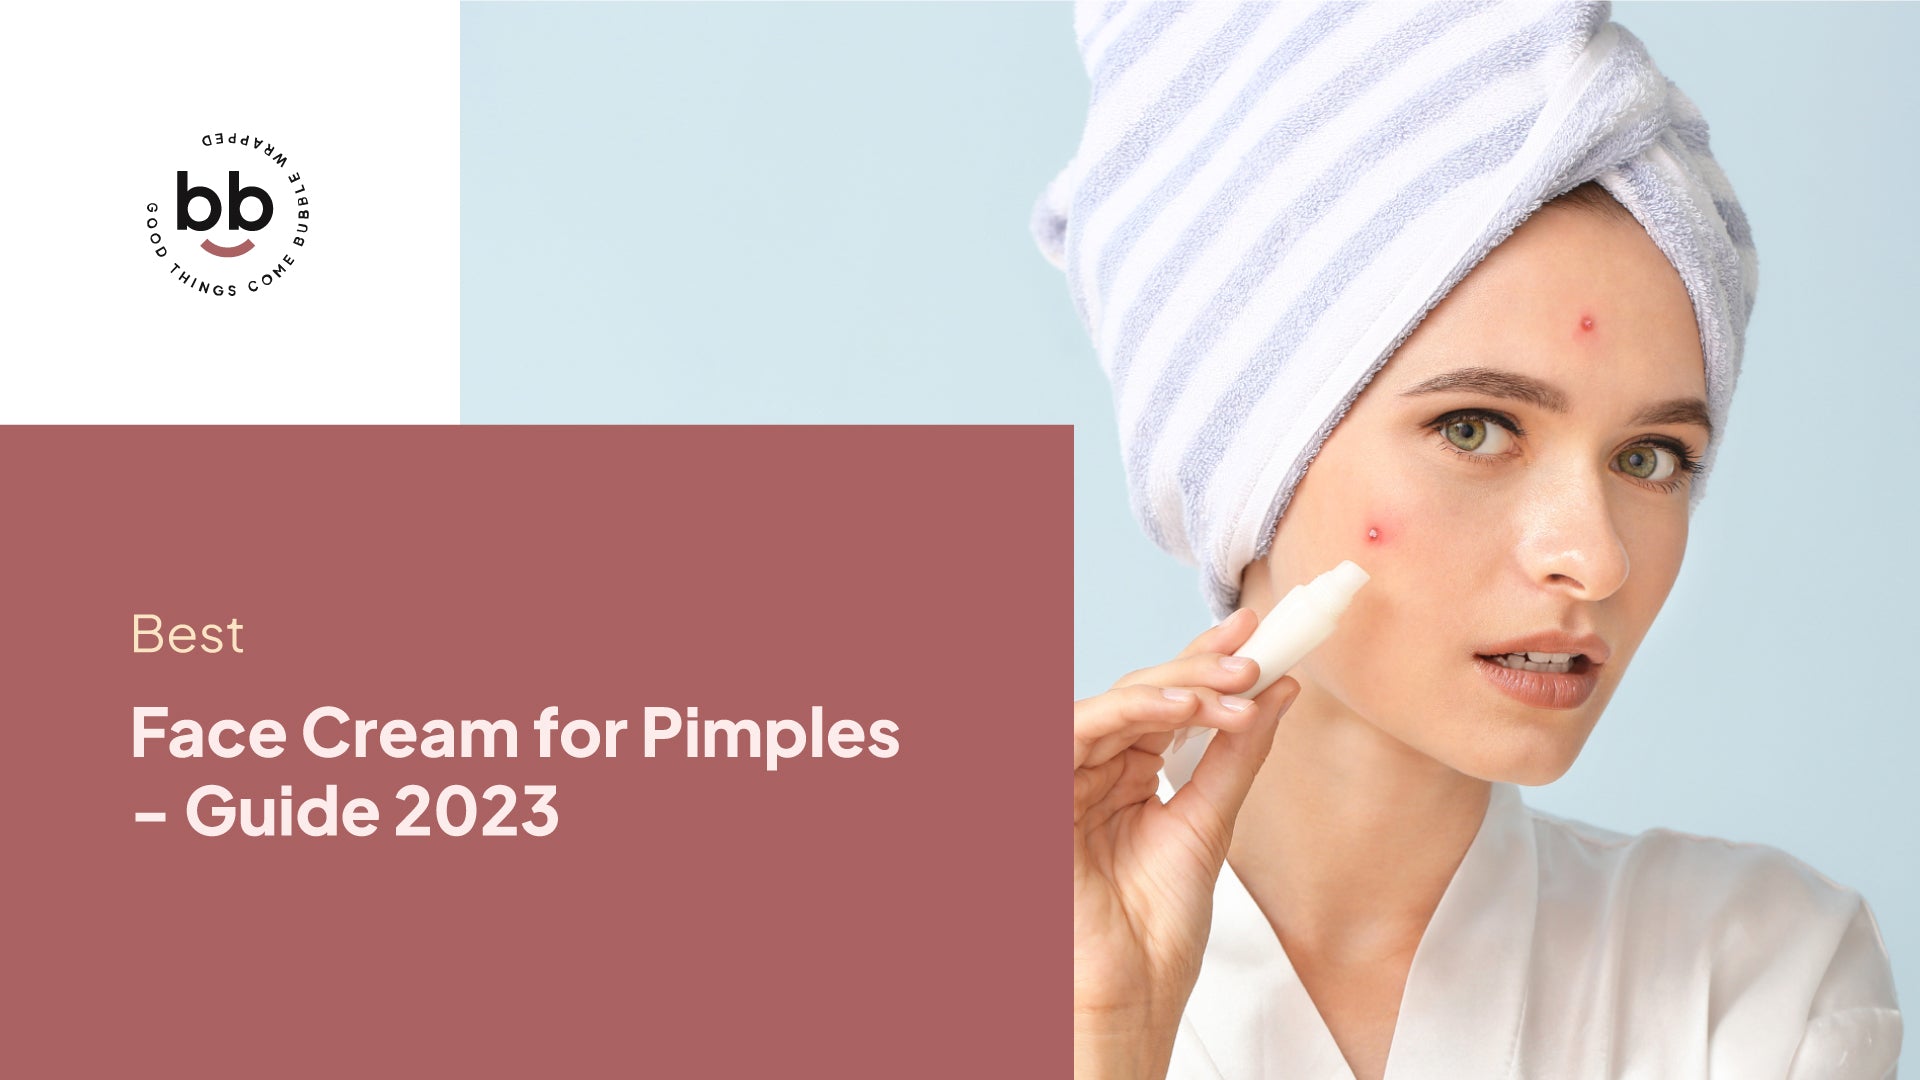 Best Face Cream for Pimples - Complete Guide 2023